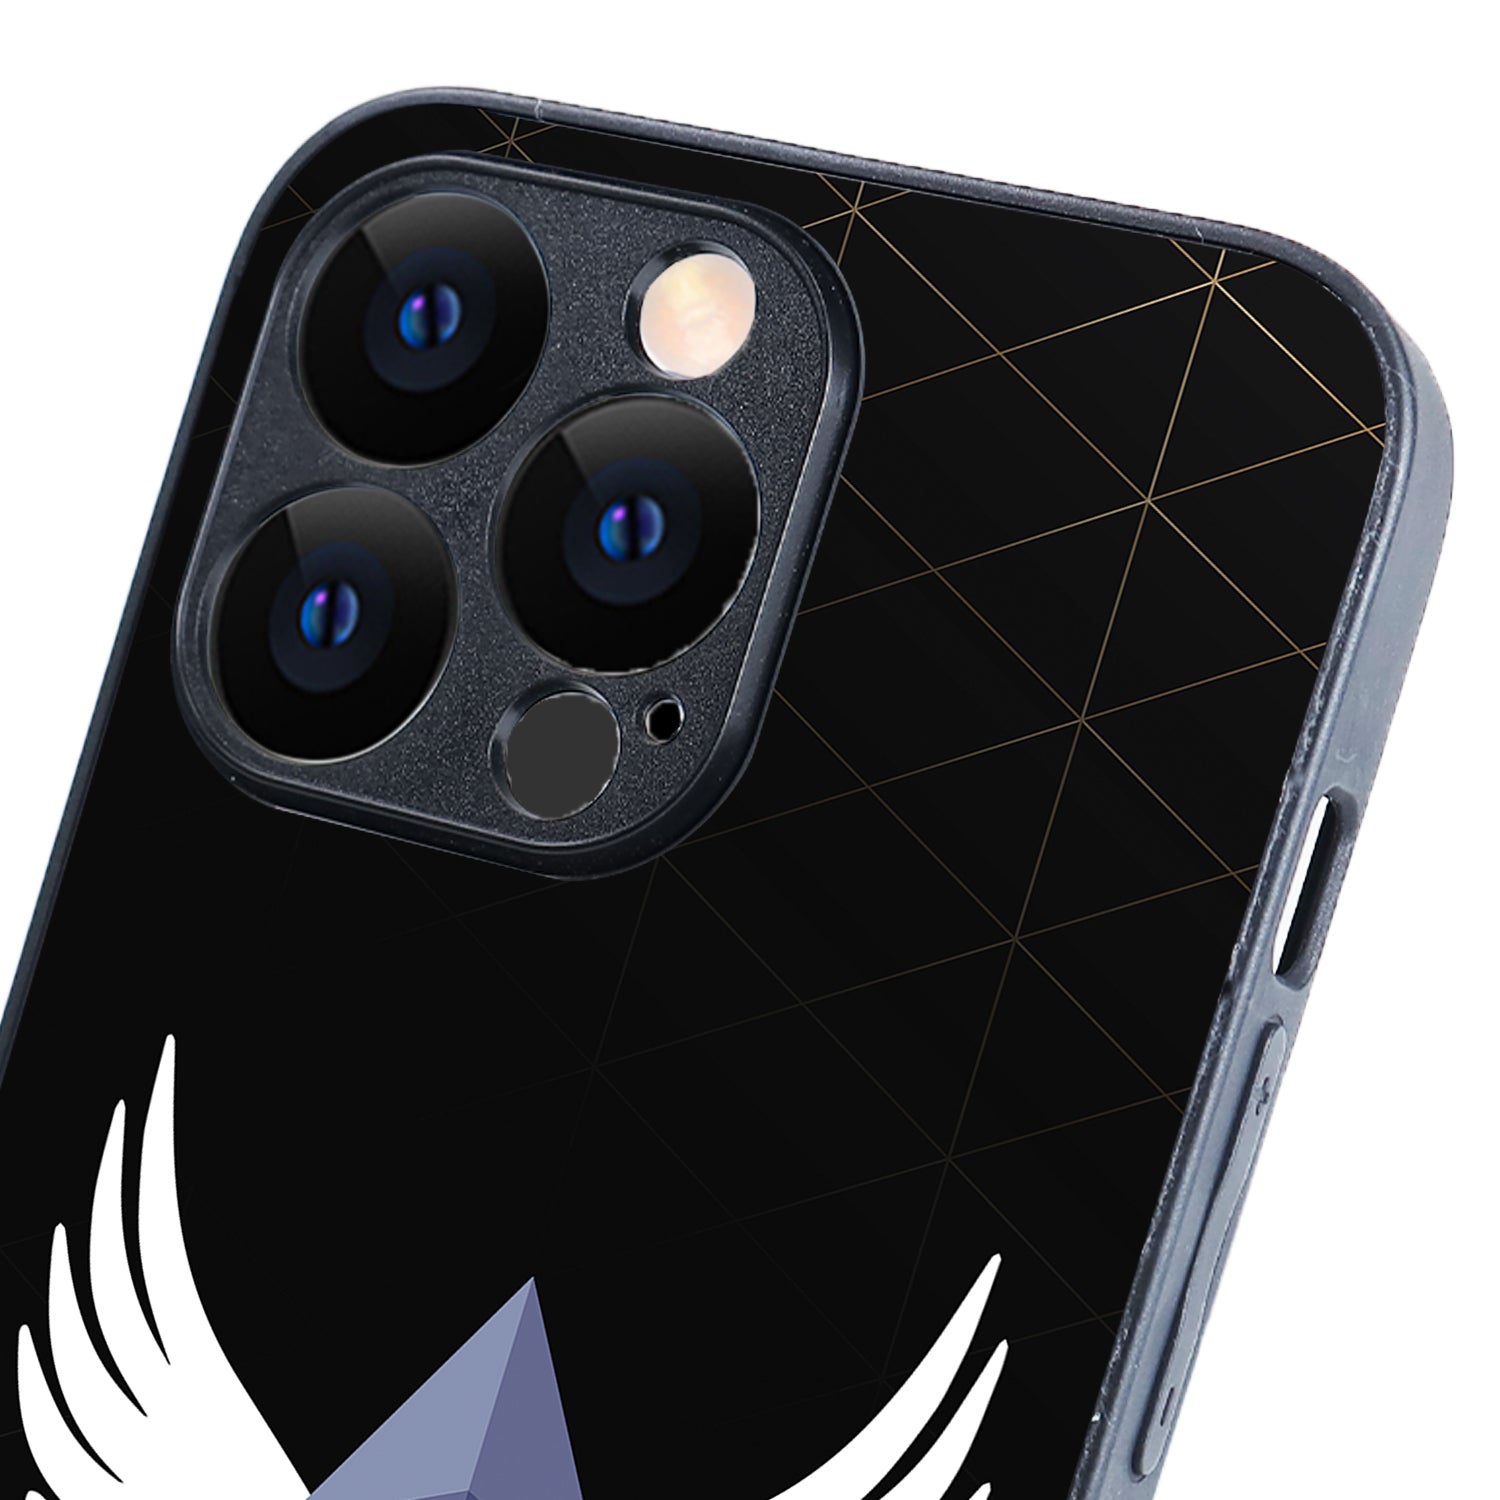 Ethereum Wings Trading iPhone 13 Pro Case